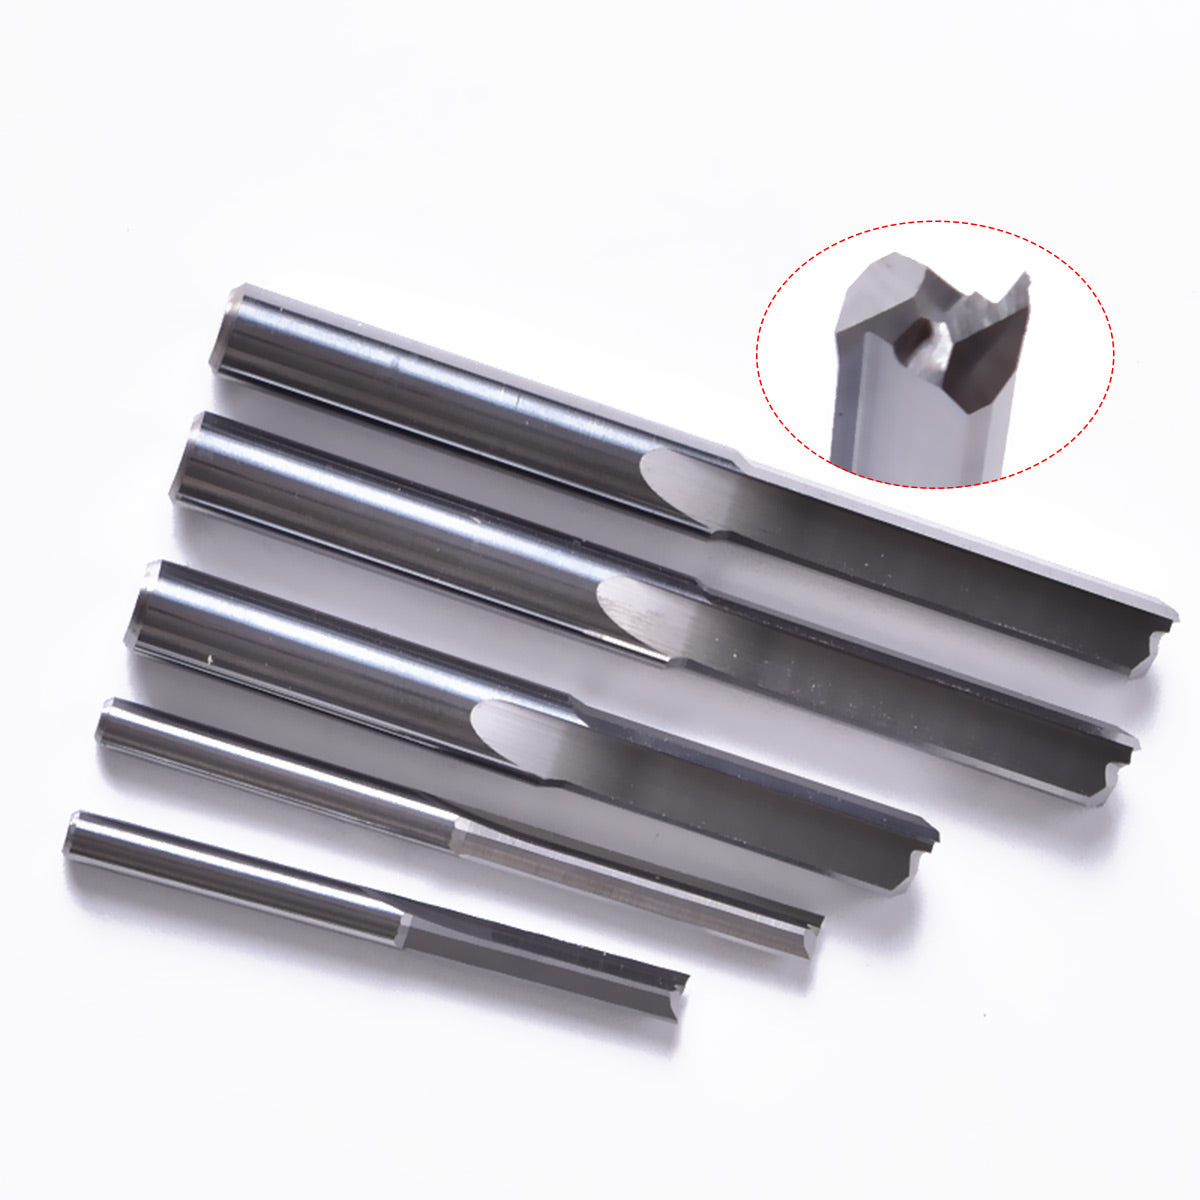 Startnow 10PCS Milling Cutters Tungsten Carbide Two Flutes Straight Bits 3.175 4 End Mills MDF Plywood CNC Router Engraving Bit